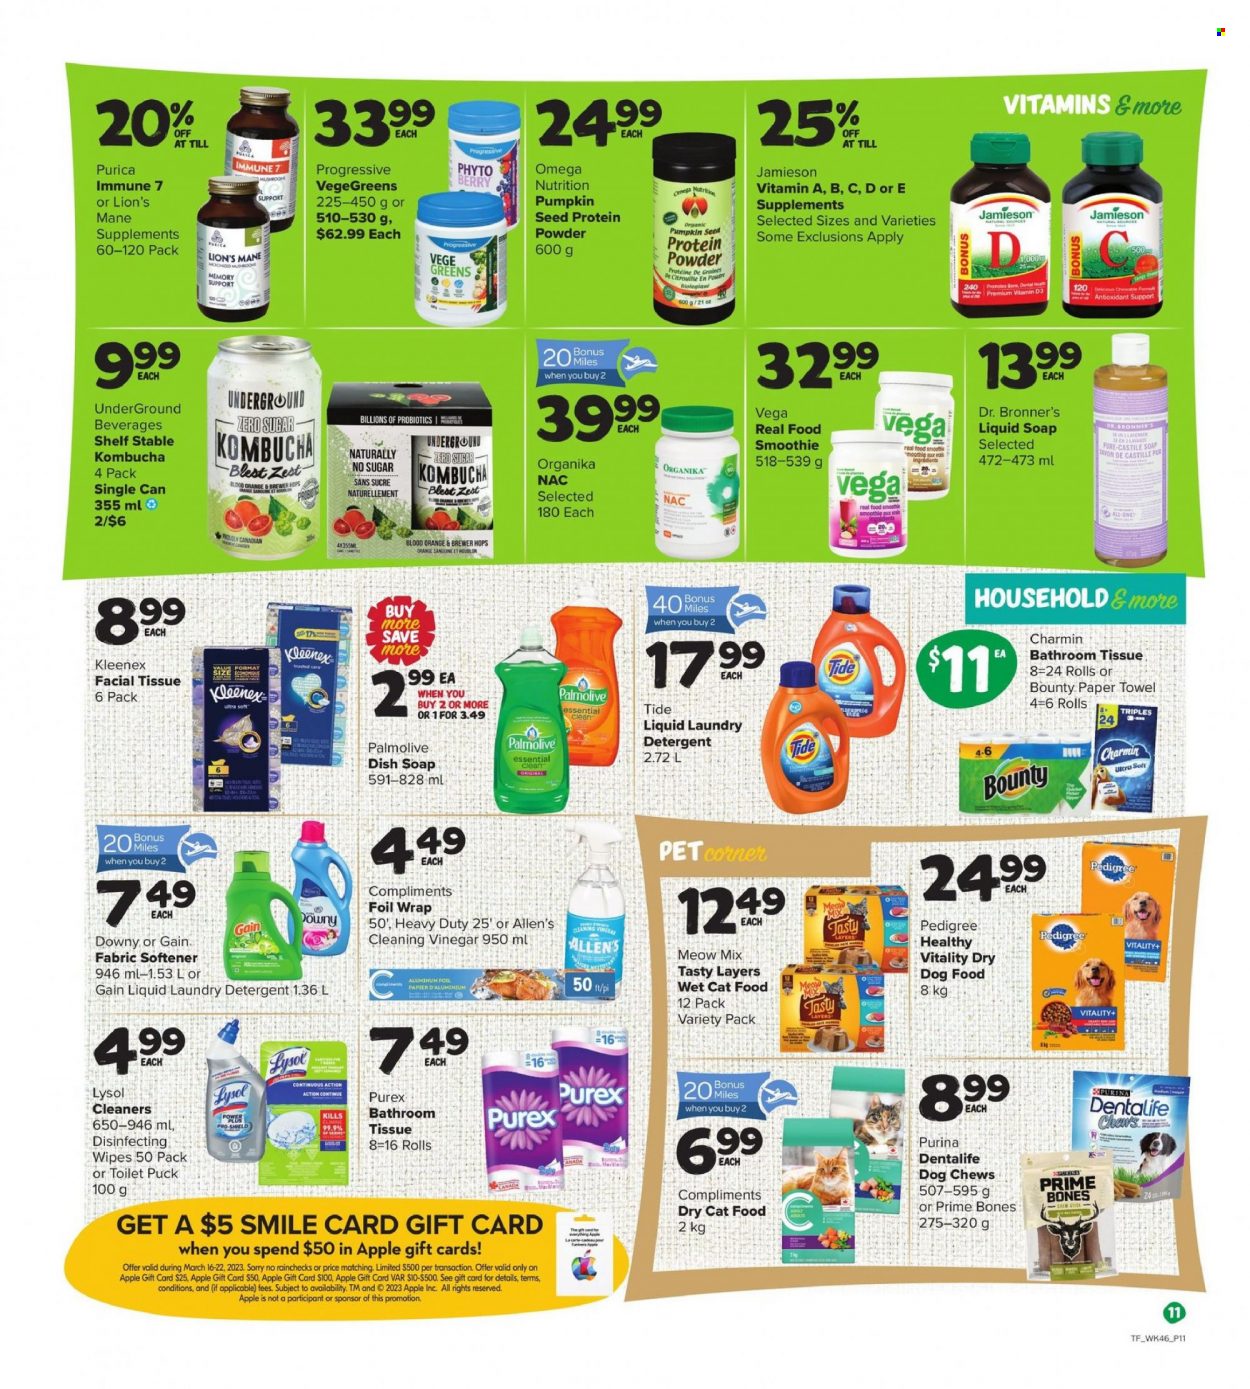 thumbnail - Thrifty Foods Flyer - March 16, 2023 - March 22, 2023 - Sales products - Puck, Bounty, brewer, vinegar, smoothie, kombucha, wipes, bath tissue, Kleenex, paper towels, Charmin, Gain, Lysol, Tide, fabric softener, laundry detergent, Purex, Palmolive, soap, animal food, dry dog food, animal treats, cat food, dog food, Purina, Pedigree, Dentalife, dog chews, dry cat food, Meow Mix, wet cat food, probiotics, whey protein, vitamin D3, detergent. Page 11.